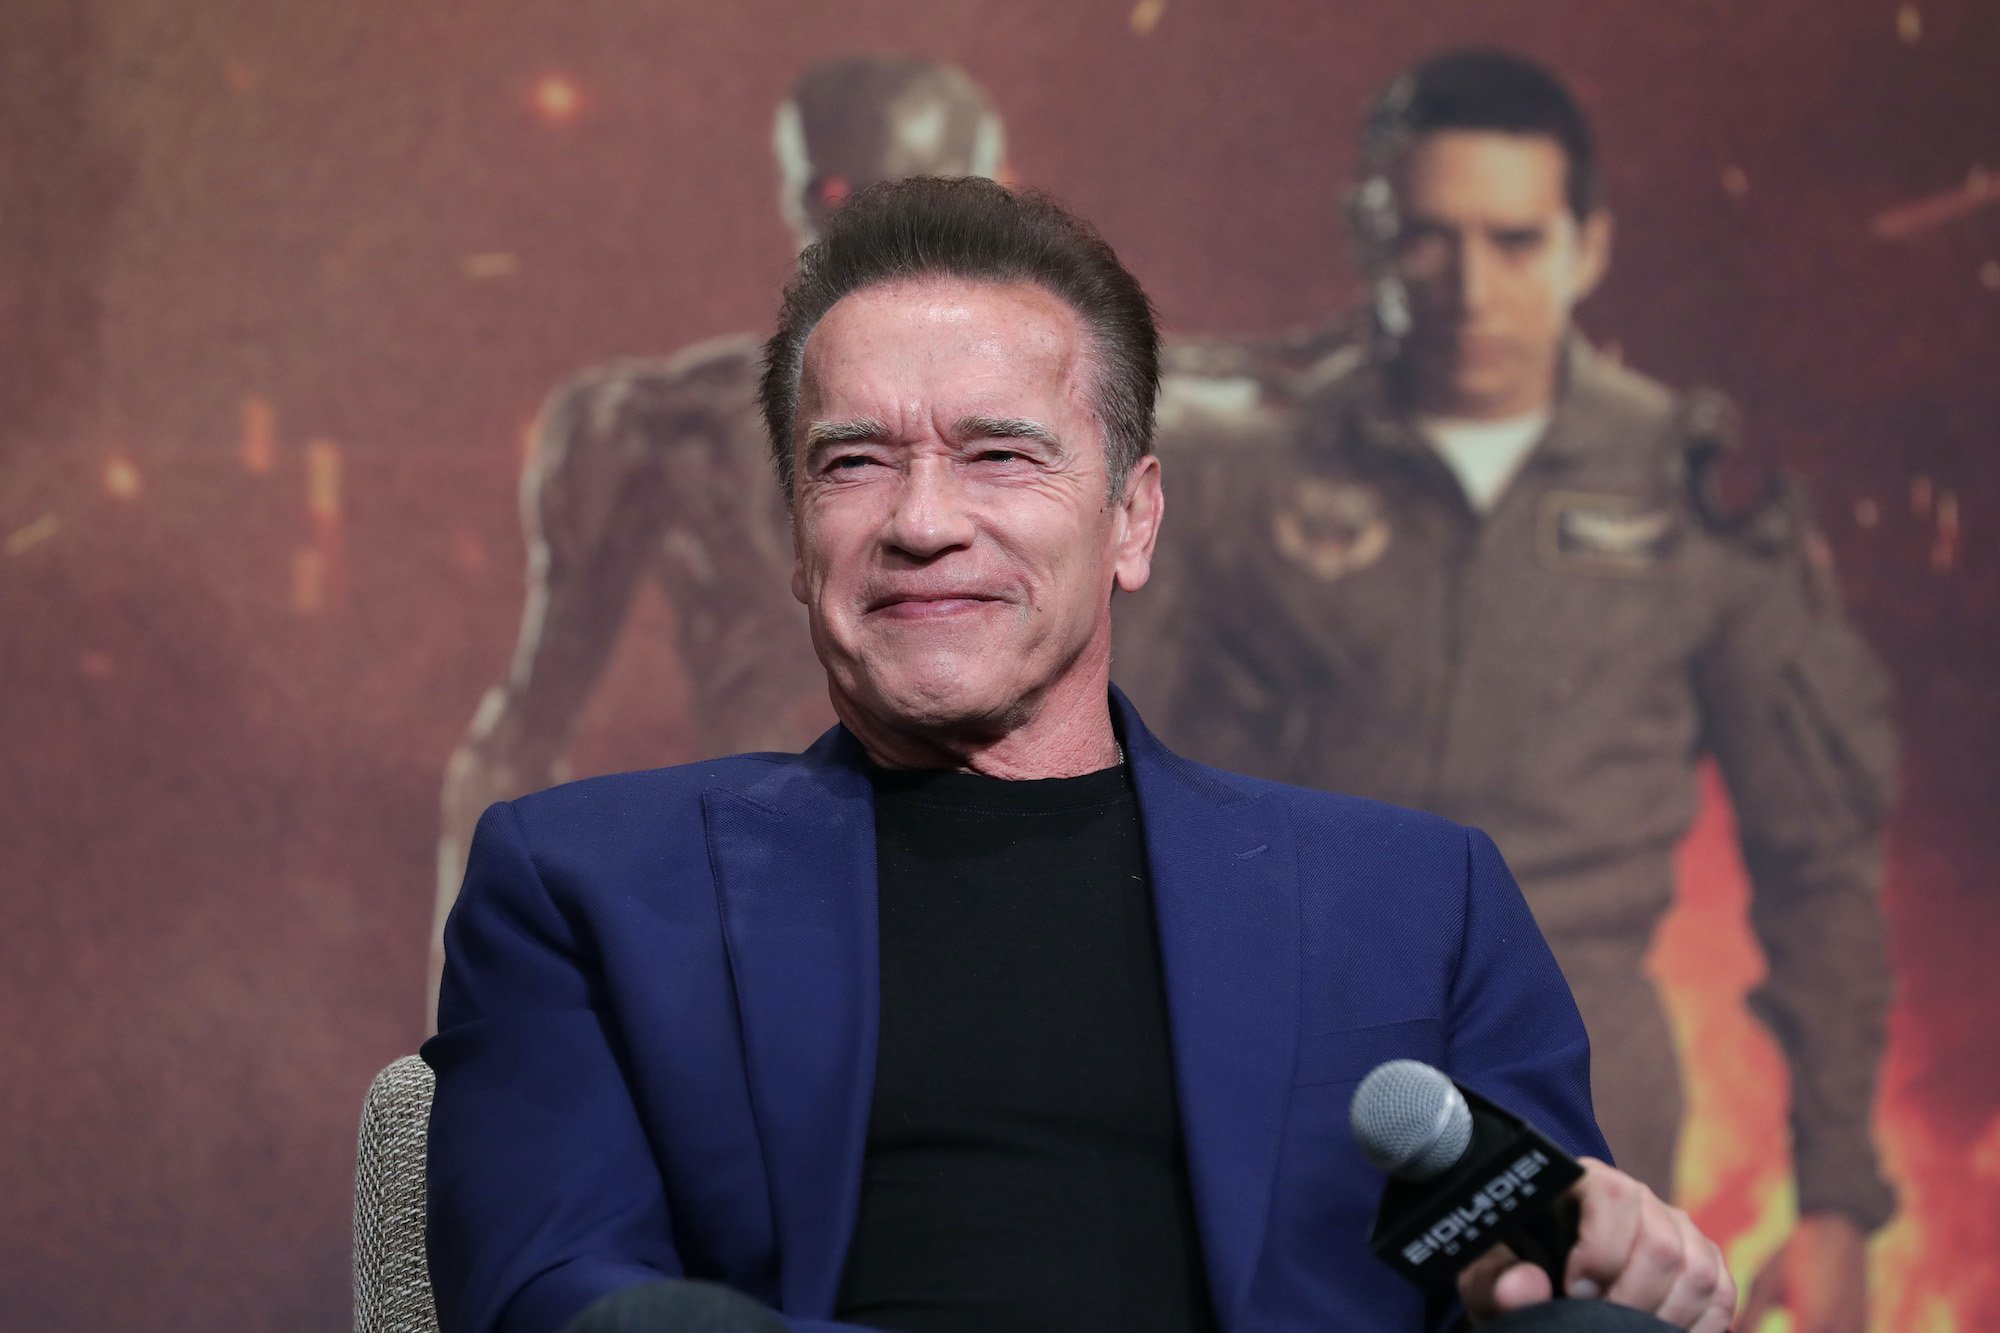 Arnold Schwarzenegger Once Hid an Insulting Message in His Veto of a Bill He Didn’t Like